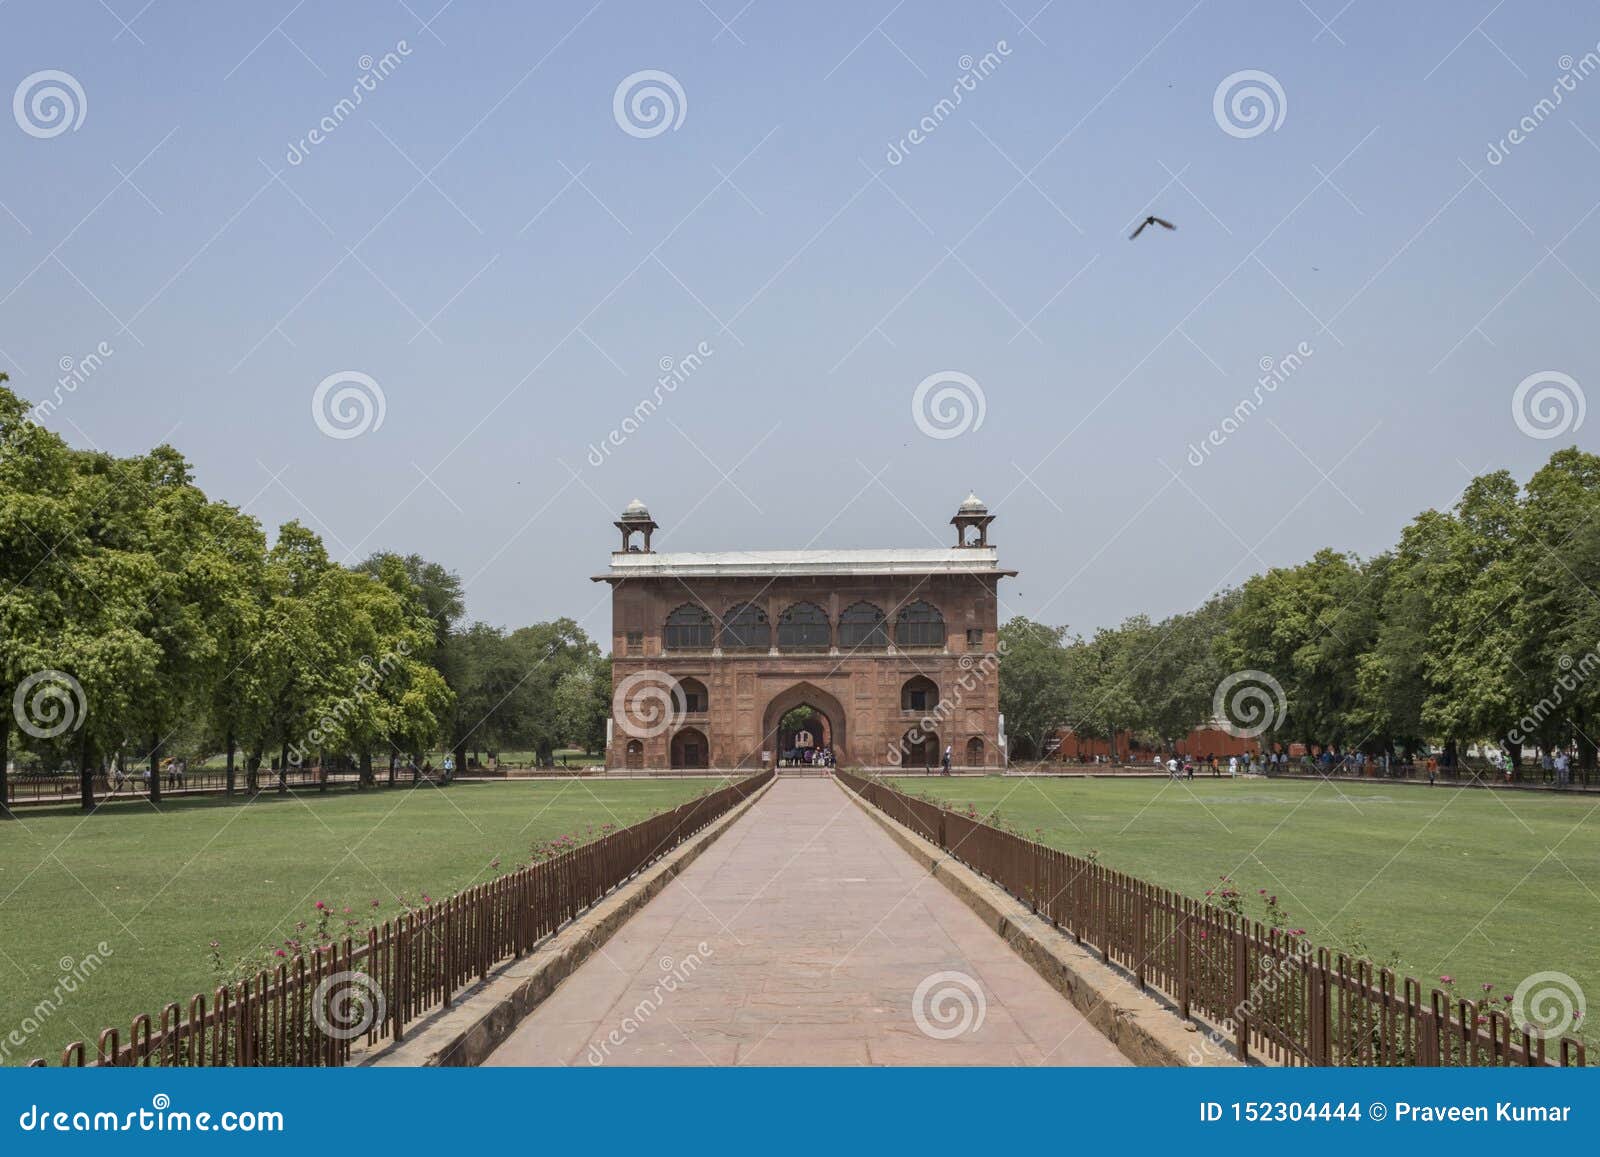 red fort or lal qila in delhi is a unesco heritage site which has a museum dedicated to the brave warriors who fought for india.